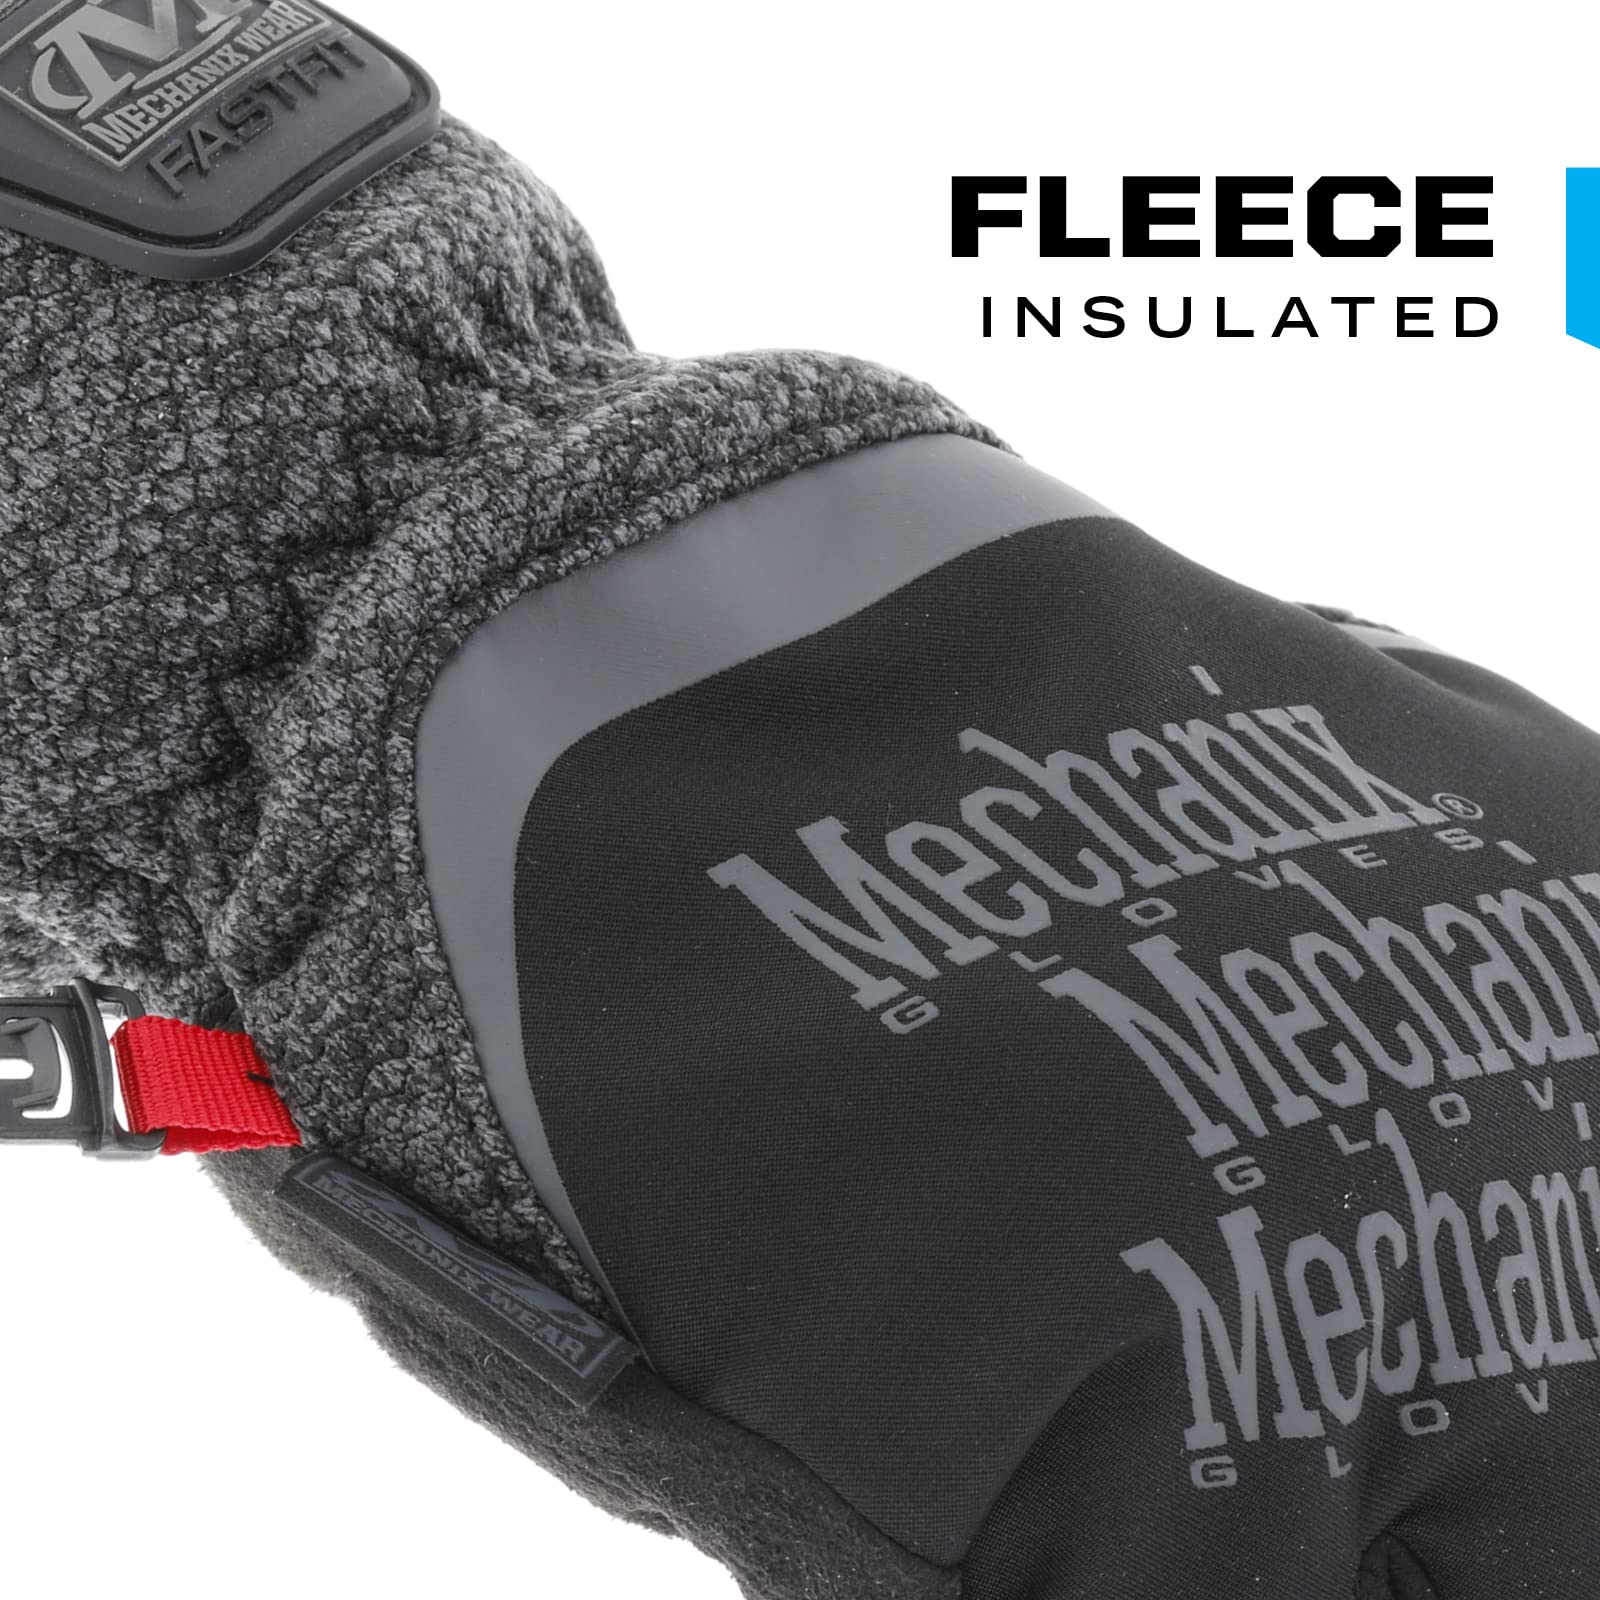 Mechanix Wear: ColdWork FastFit Winter Work Gloves with Elastic Cuff, Wind and Water Resistant, Fleece Insulated, Touch Capable Winter Gloves, For Mild Cold Weather (Black/Gray, Large)